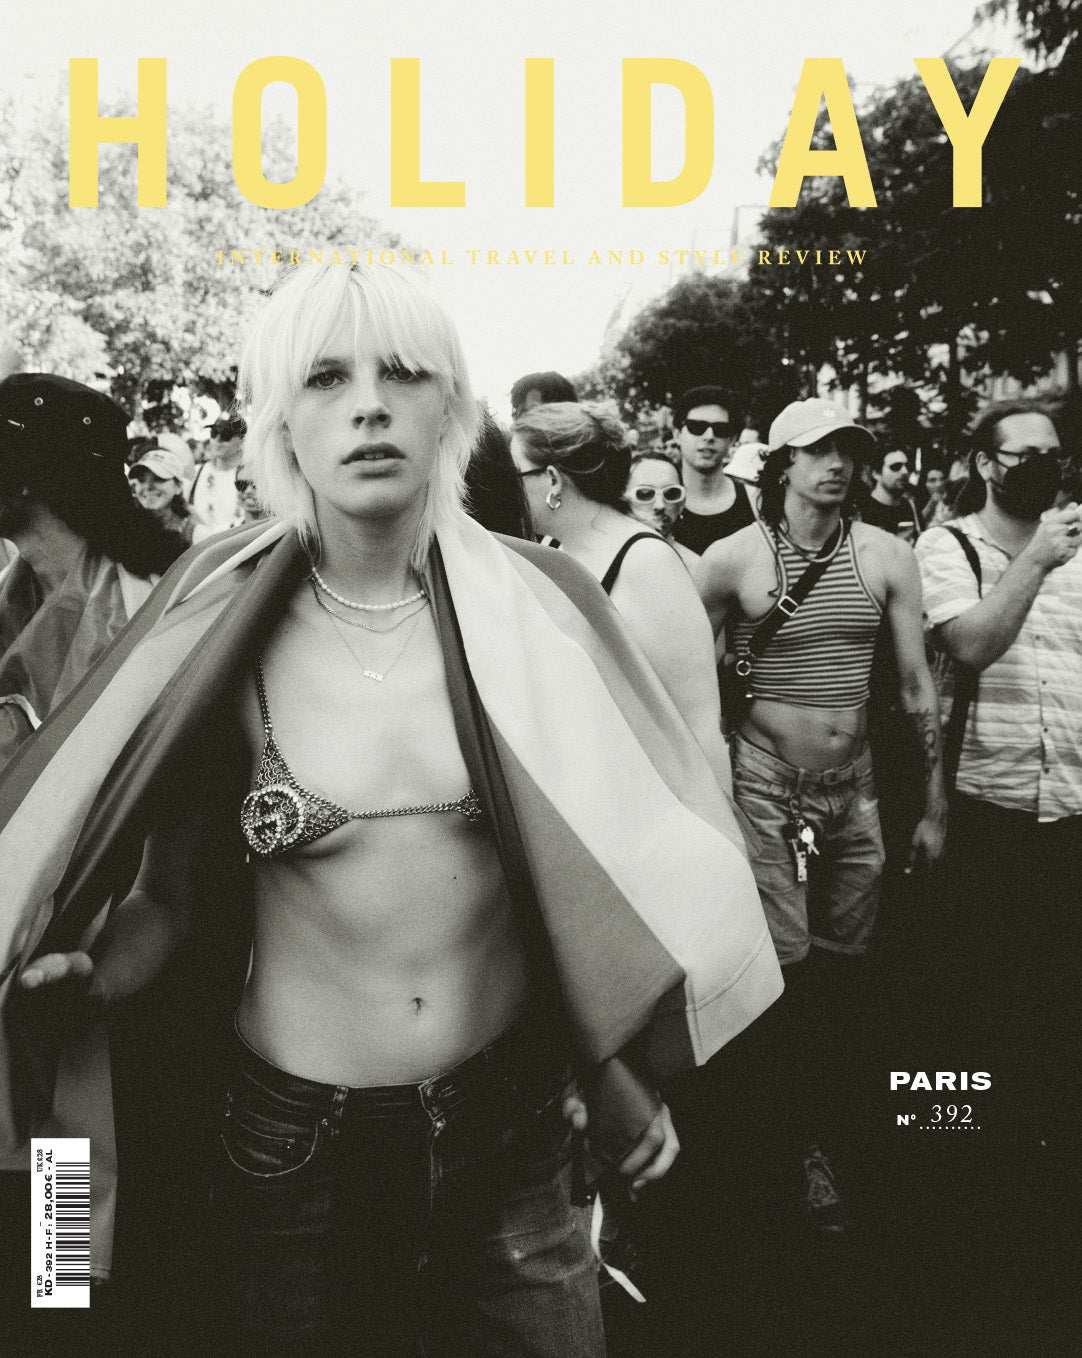 Holiday Magazine - N°392 The Paris Issue